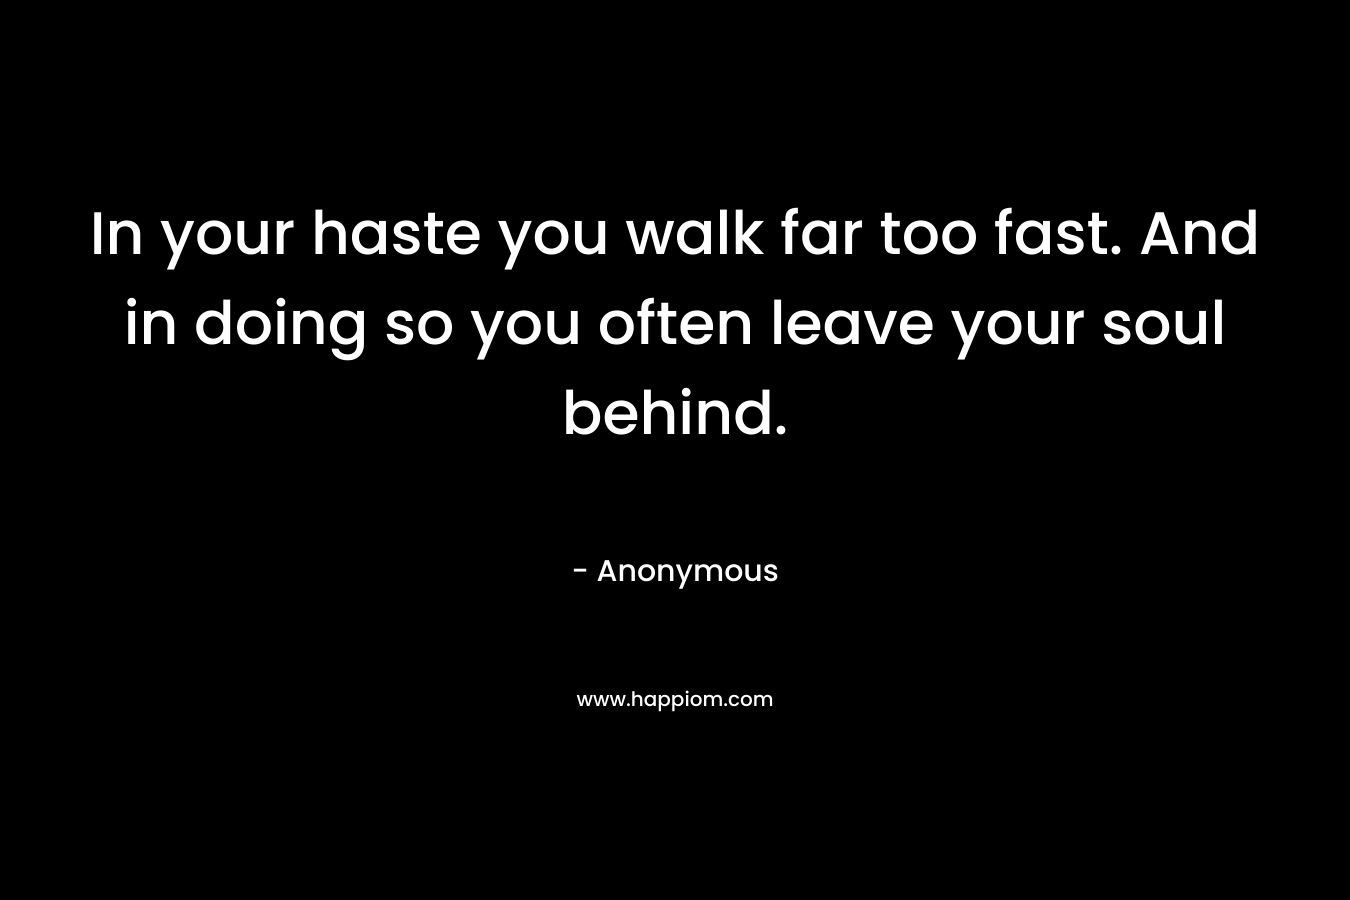 In your haste you walk far too fast. And in doing so you often leave your soul behind.